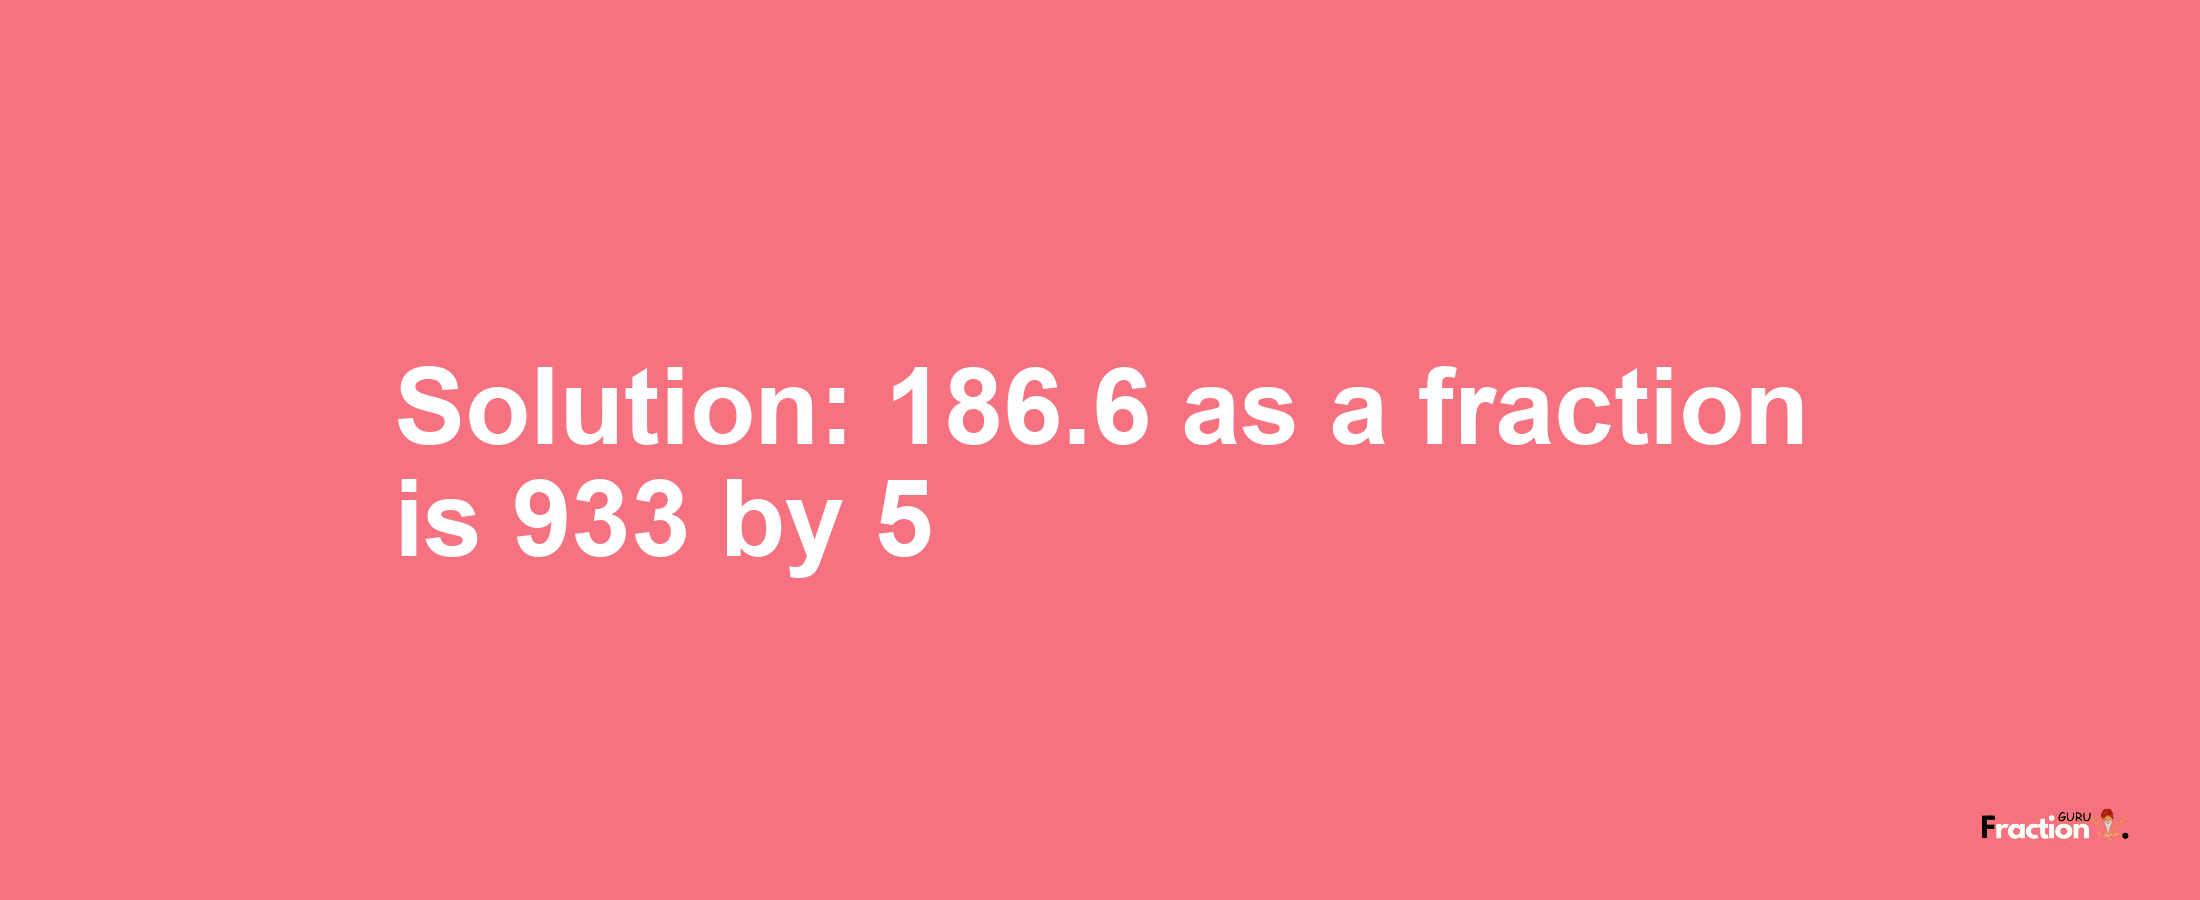 Solution:186.6 as a fraction is 933/5